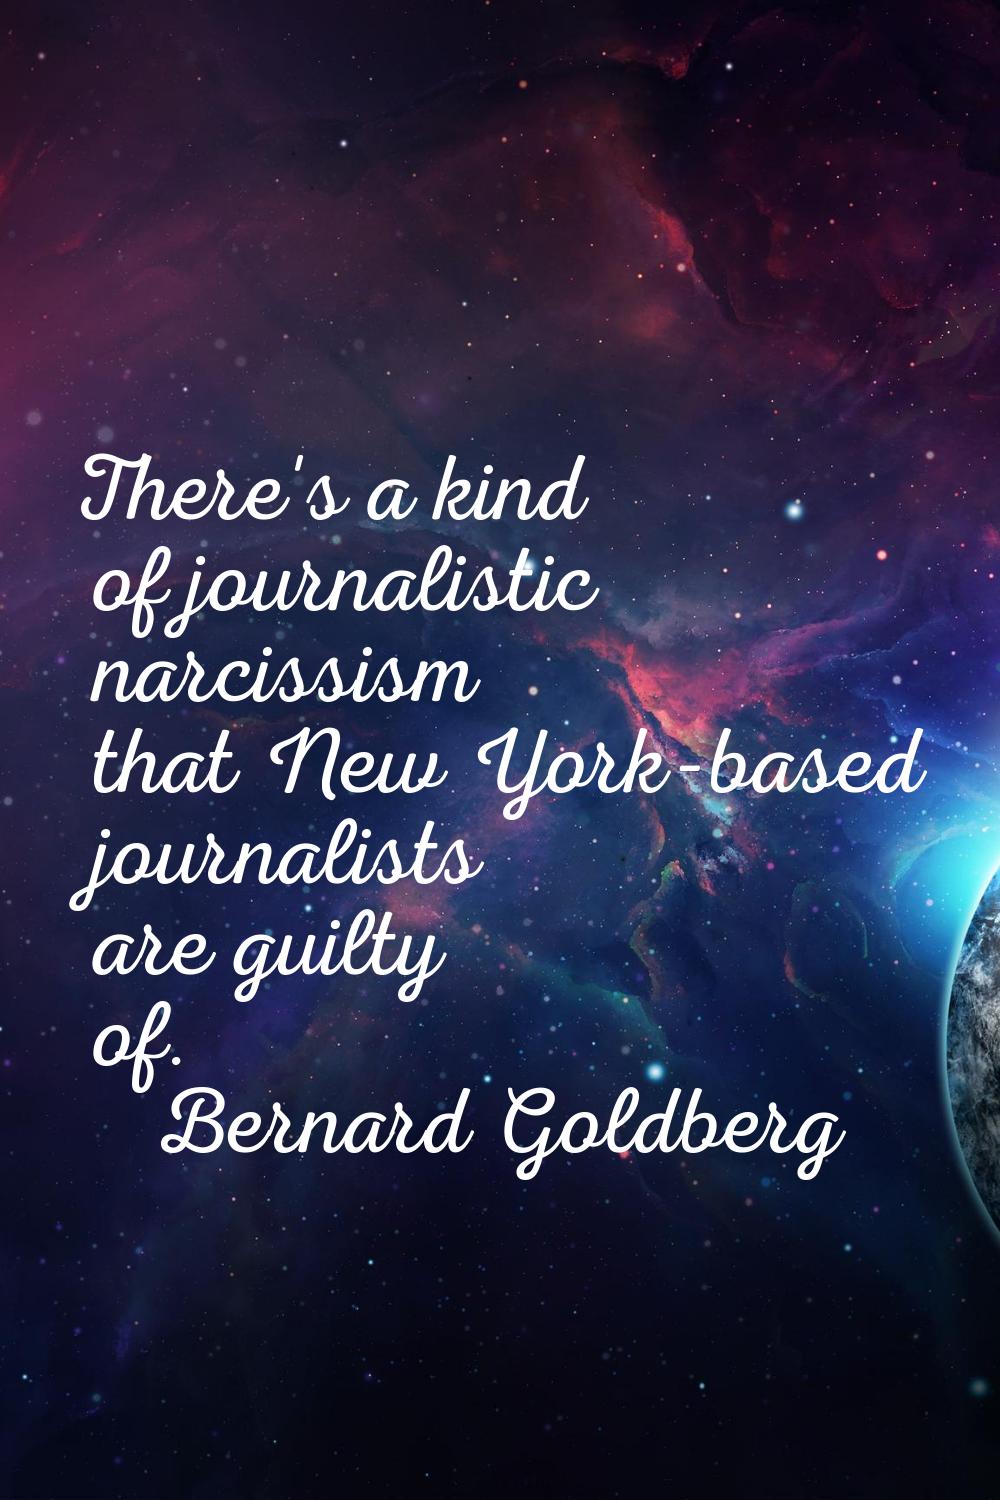 There's a kind of journalistic narcissism that New York-based journalists are guilty of.